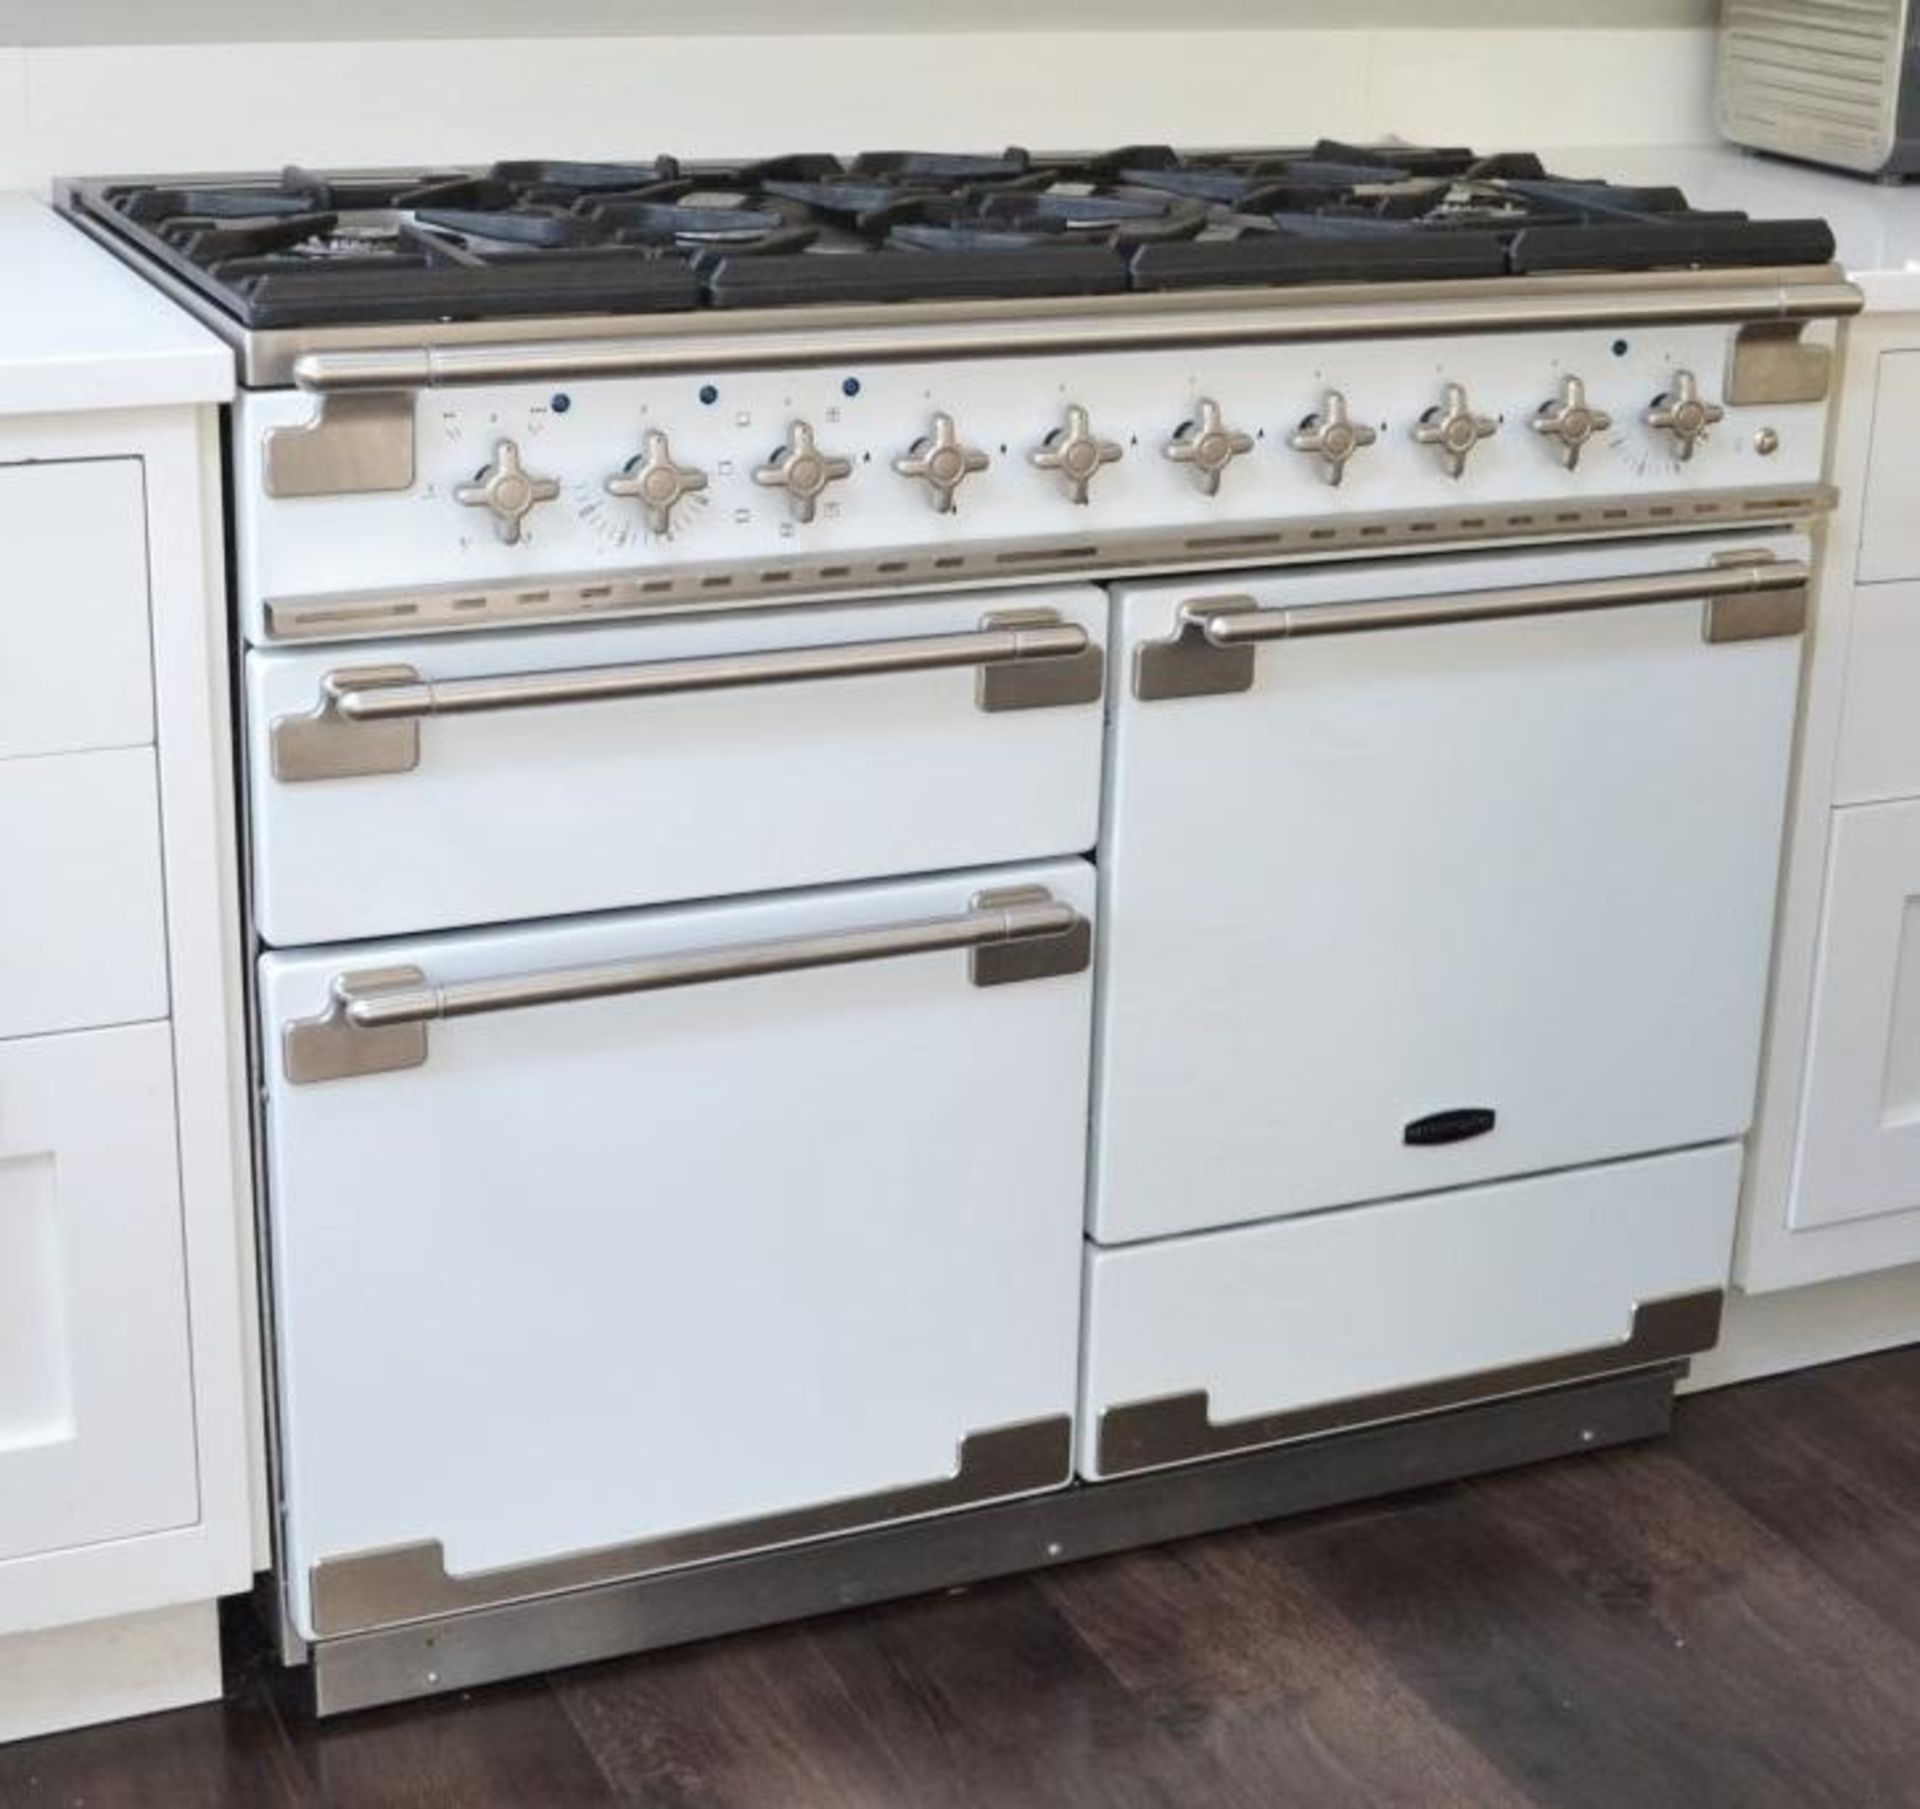 1 x Rangemaster Alise 110cm 6-Burner Gas Cooker In White And Brushed Steel - Used In Very Good, Clea